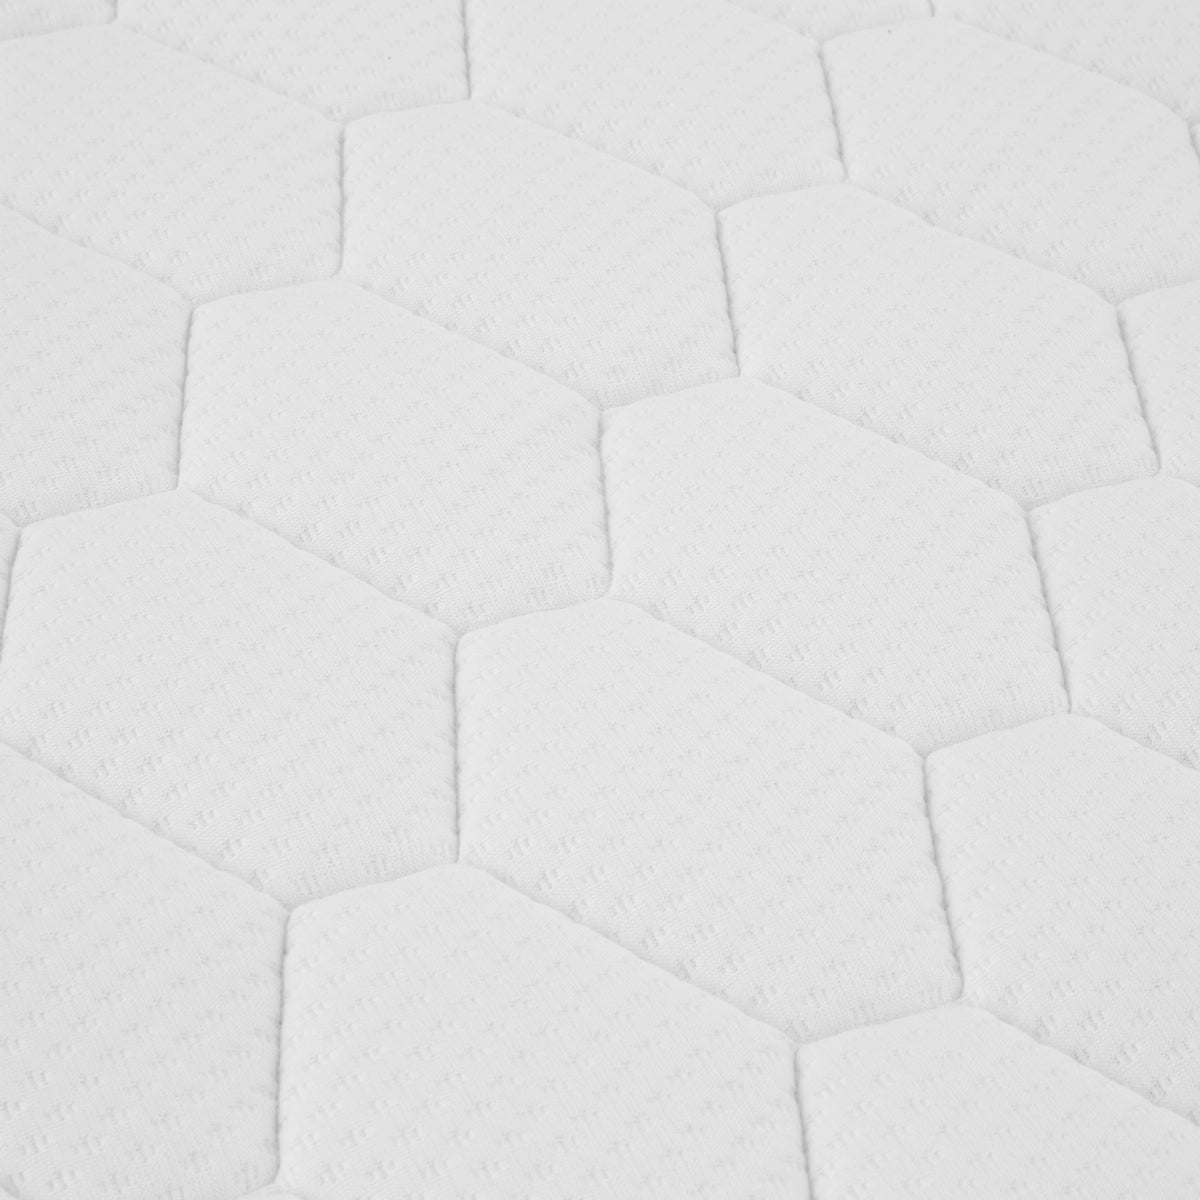 Roseland Sleep Classic Pocket Sprung Memory Foam Quilted Mattress quilted close up